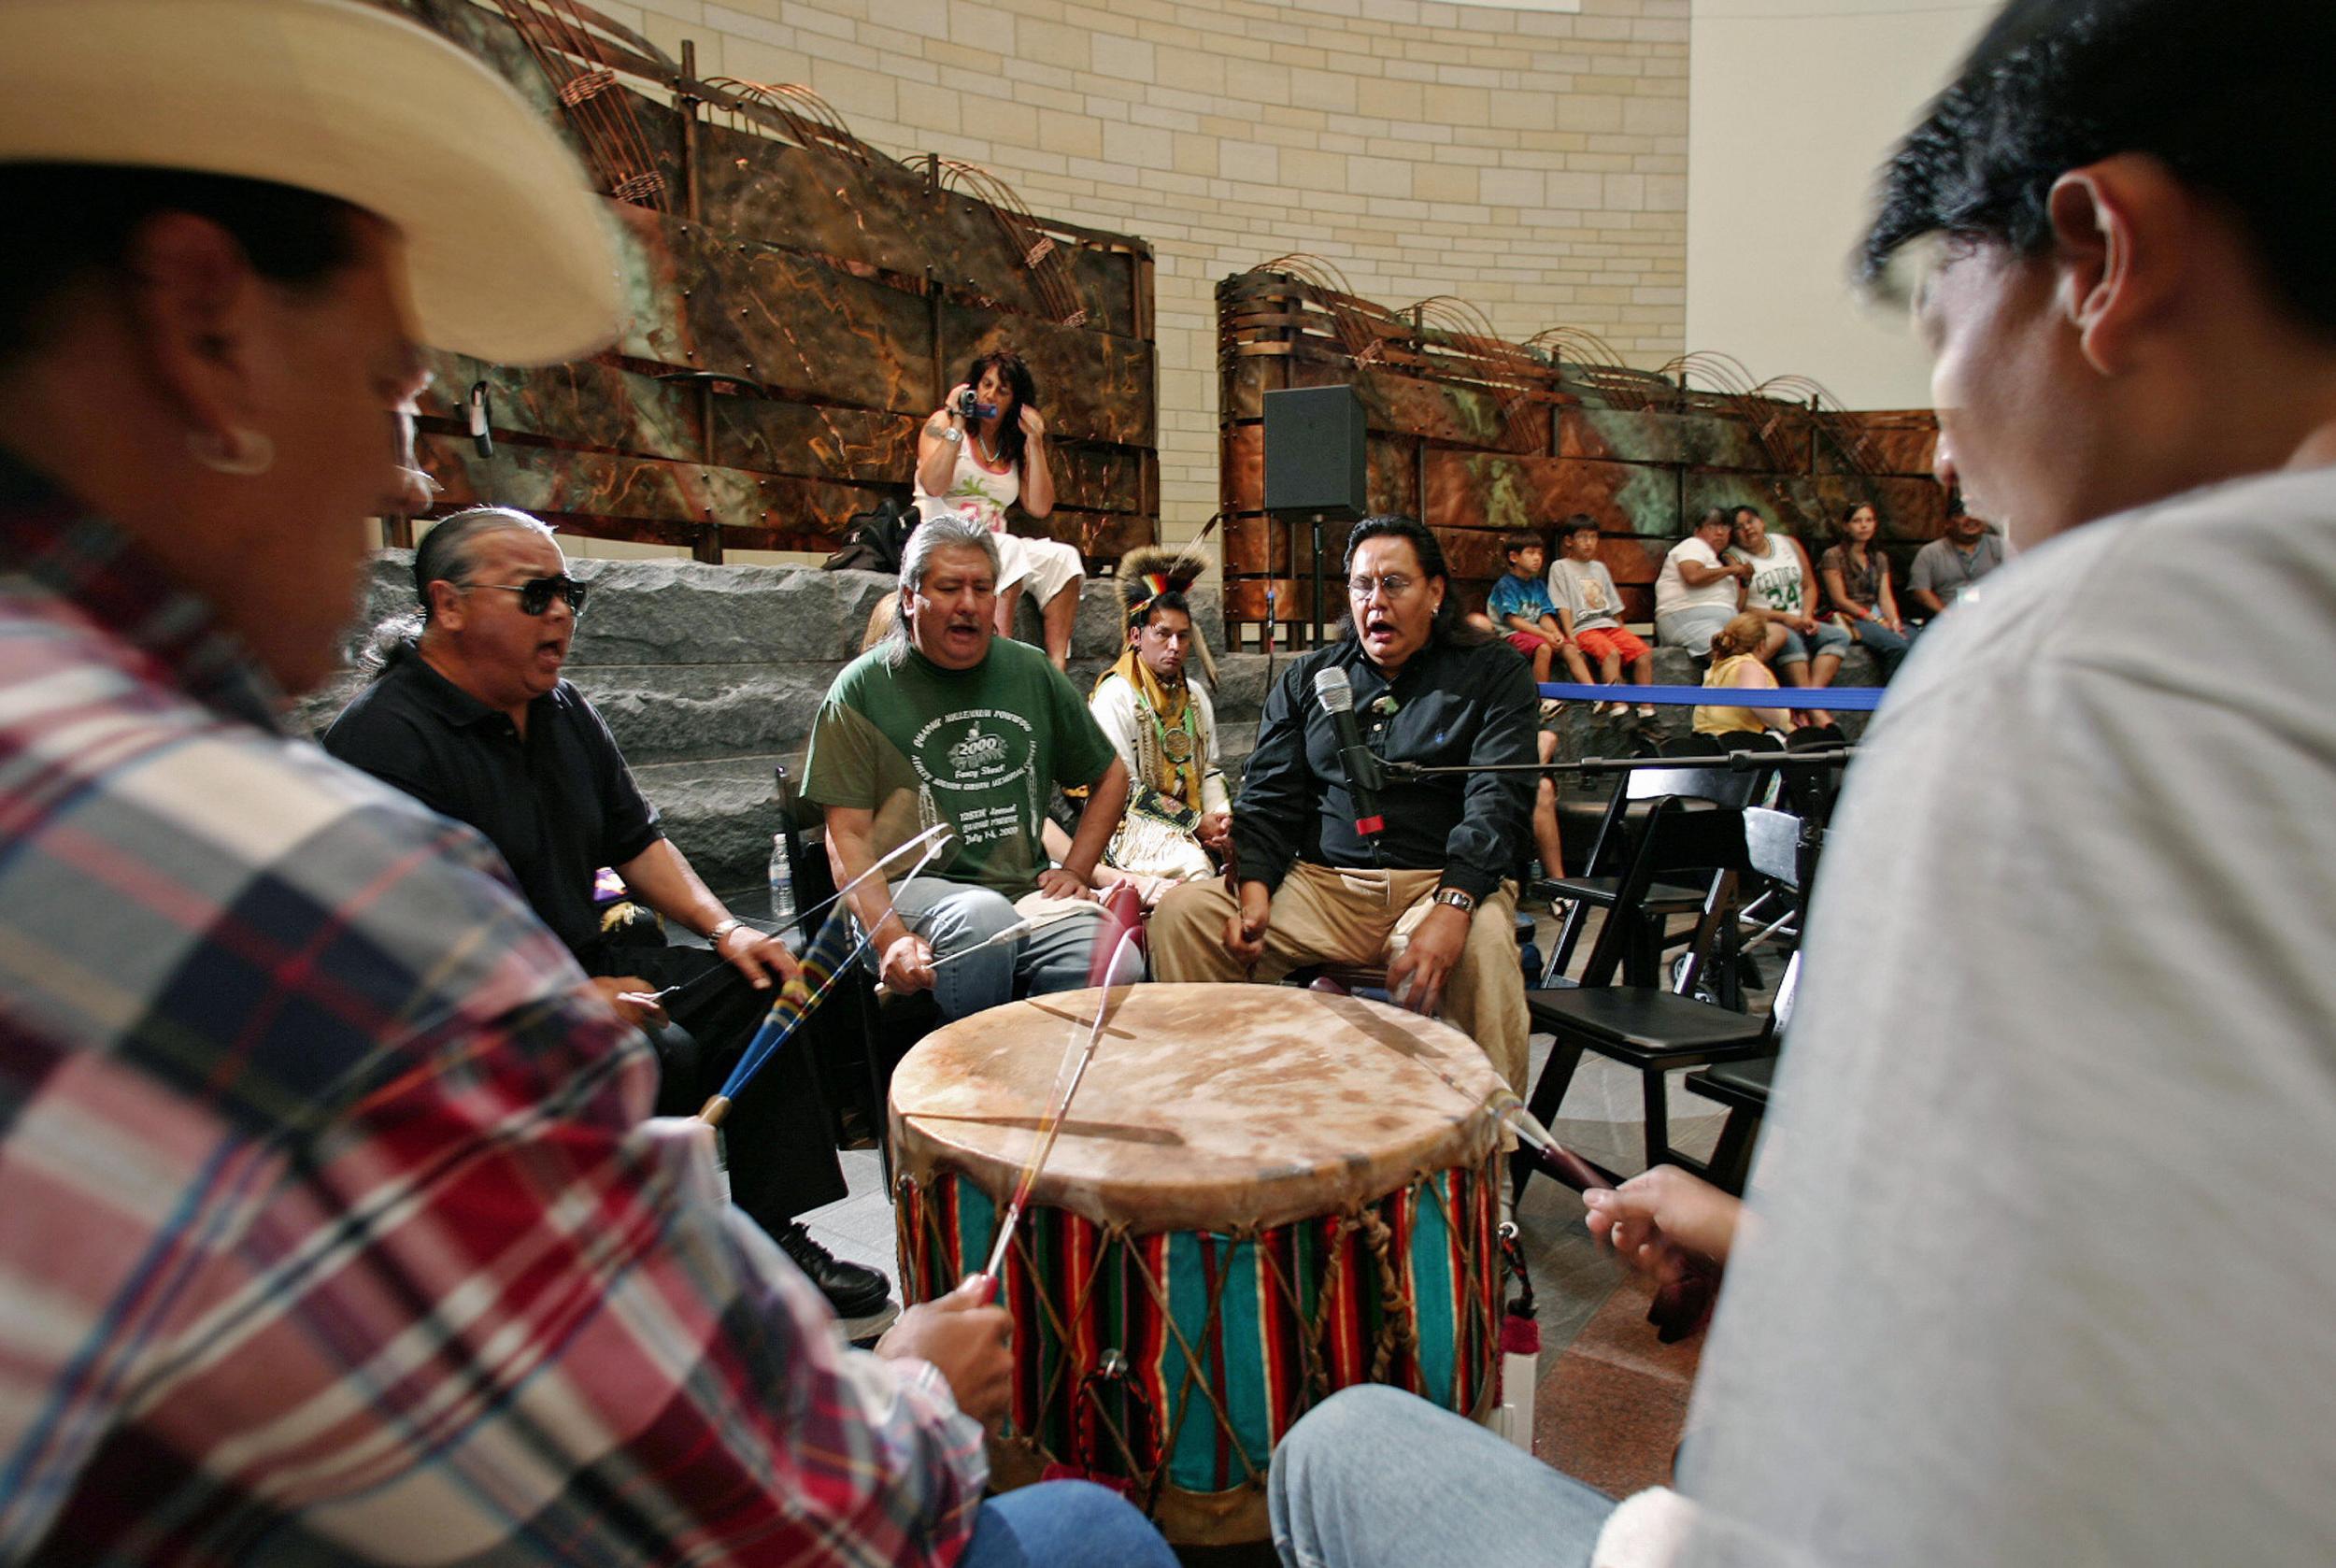 Members of the Yellow Hammer Native American drum band from Ponca City, Oklahoma, play a song for Native American dancers inside the newly opened National Museum of the American Indian in Washington, DC in 2005